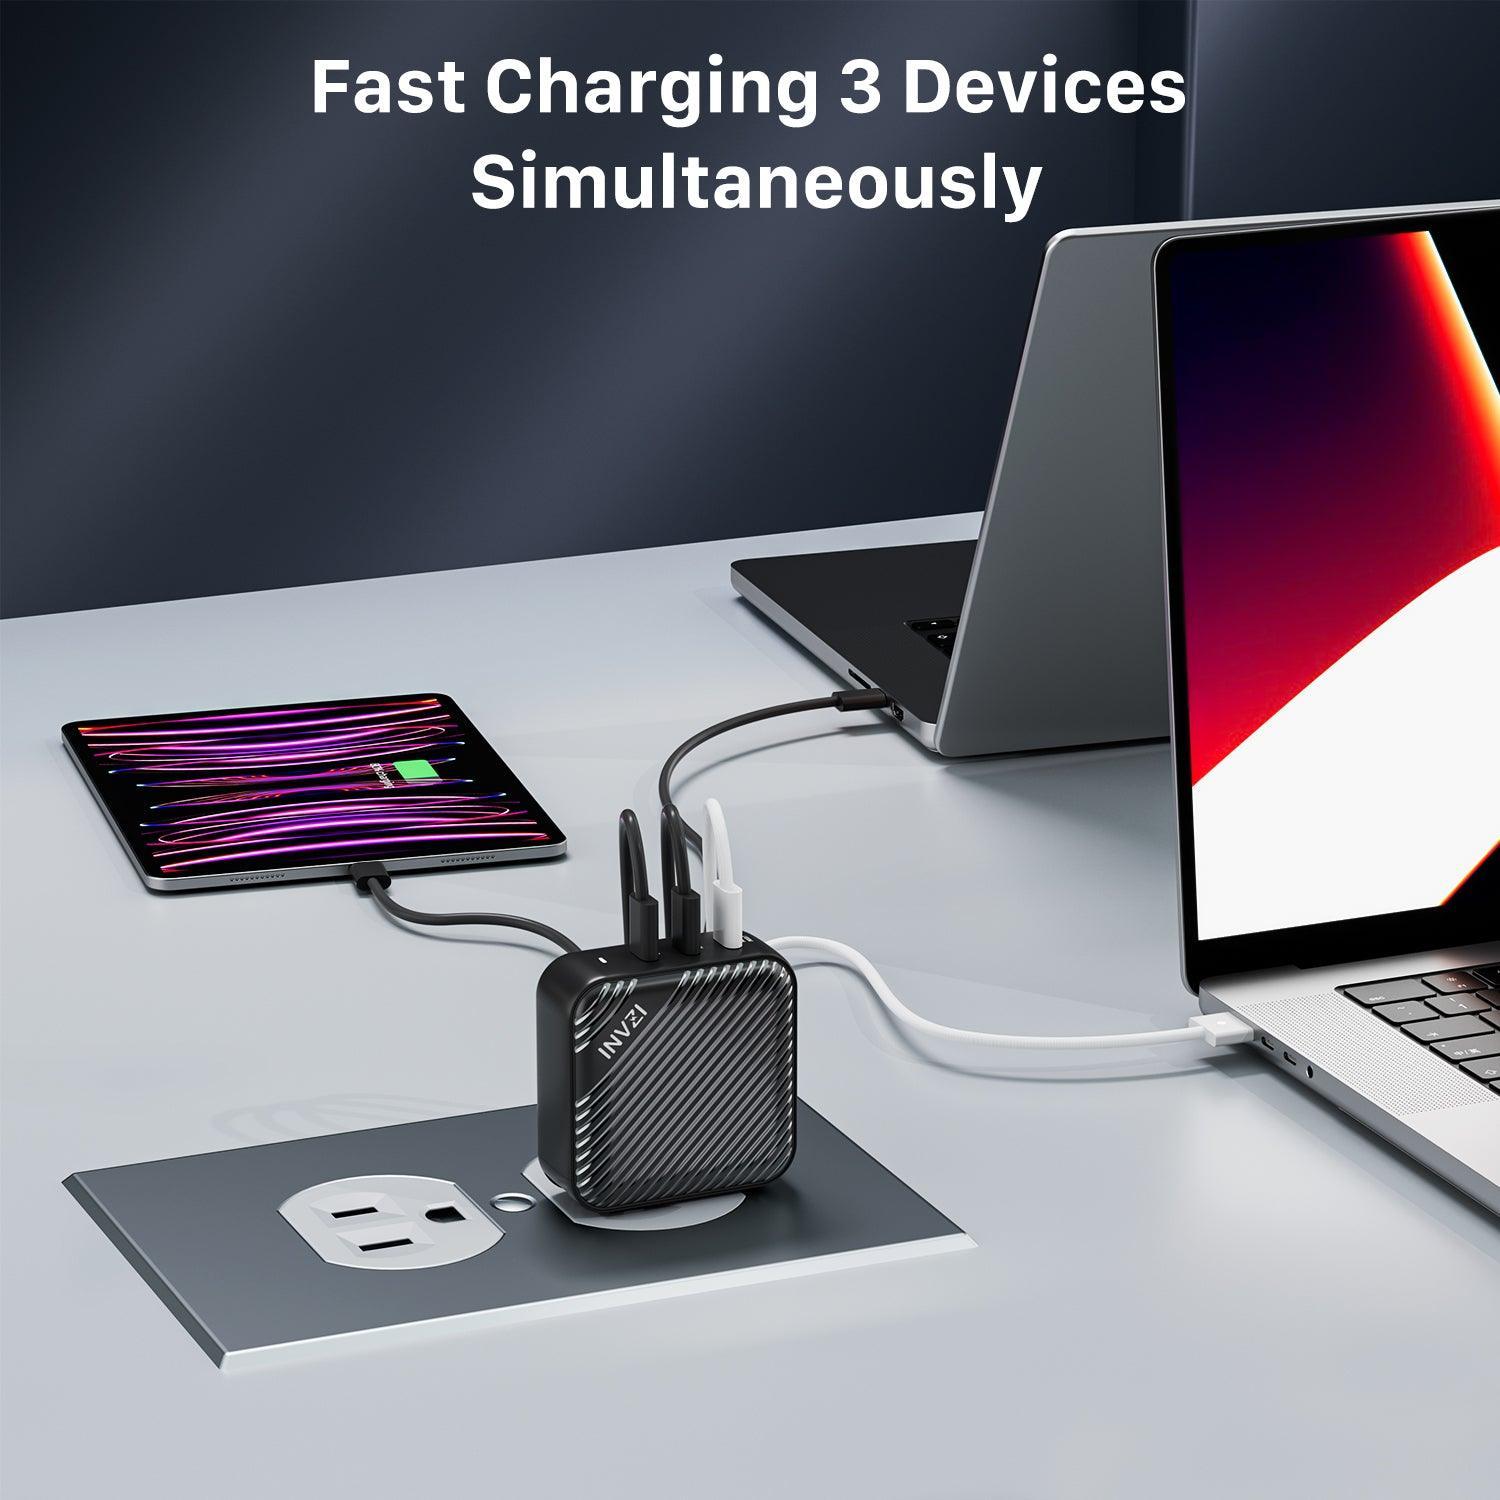 INVZI Power Adapters & Chargers INVZI GaNHub 140W GaN USB-C Charger with PD 3.1 (GaNHub 140W)